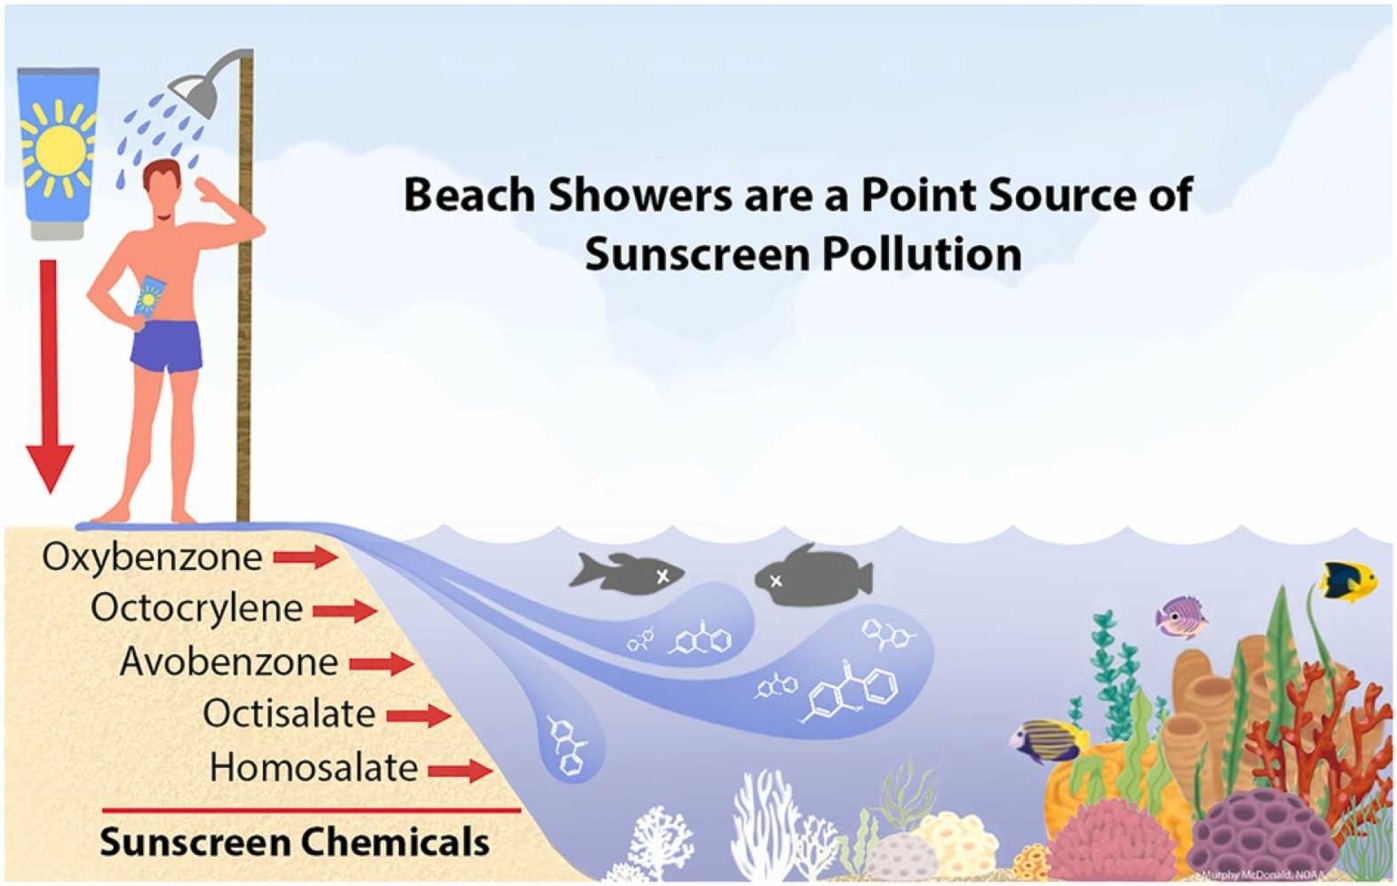 Beach Showers Pollute Hawaii's Coral Reefs with Sunscreen